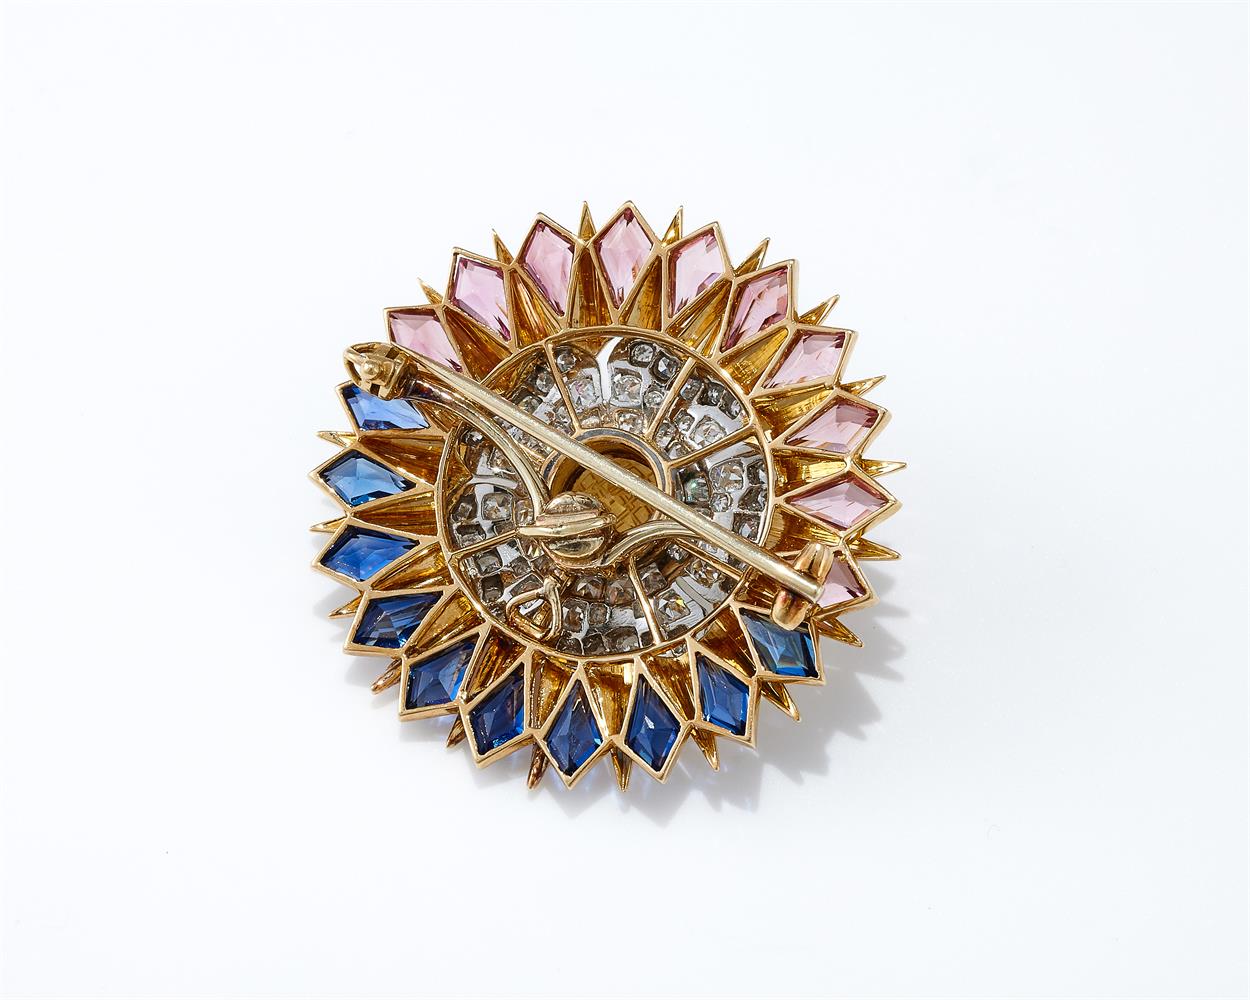 CARTIER, THE 'ELTHAM PALACE' DIAMOND AND GEM SET BROOCHES - Image 7 of 7